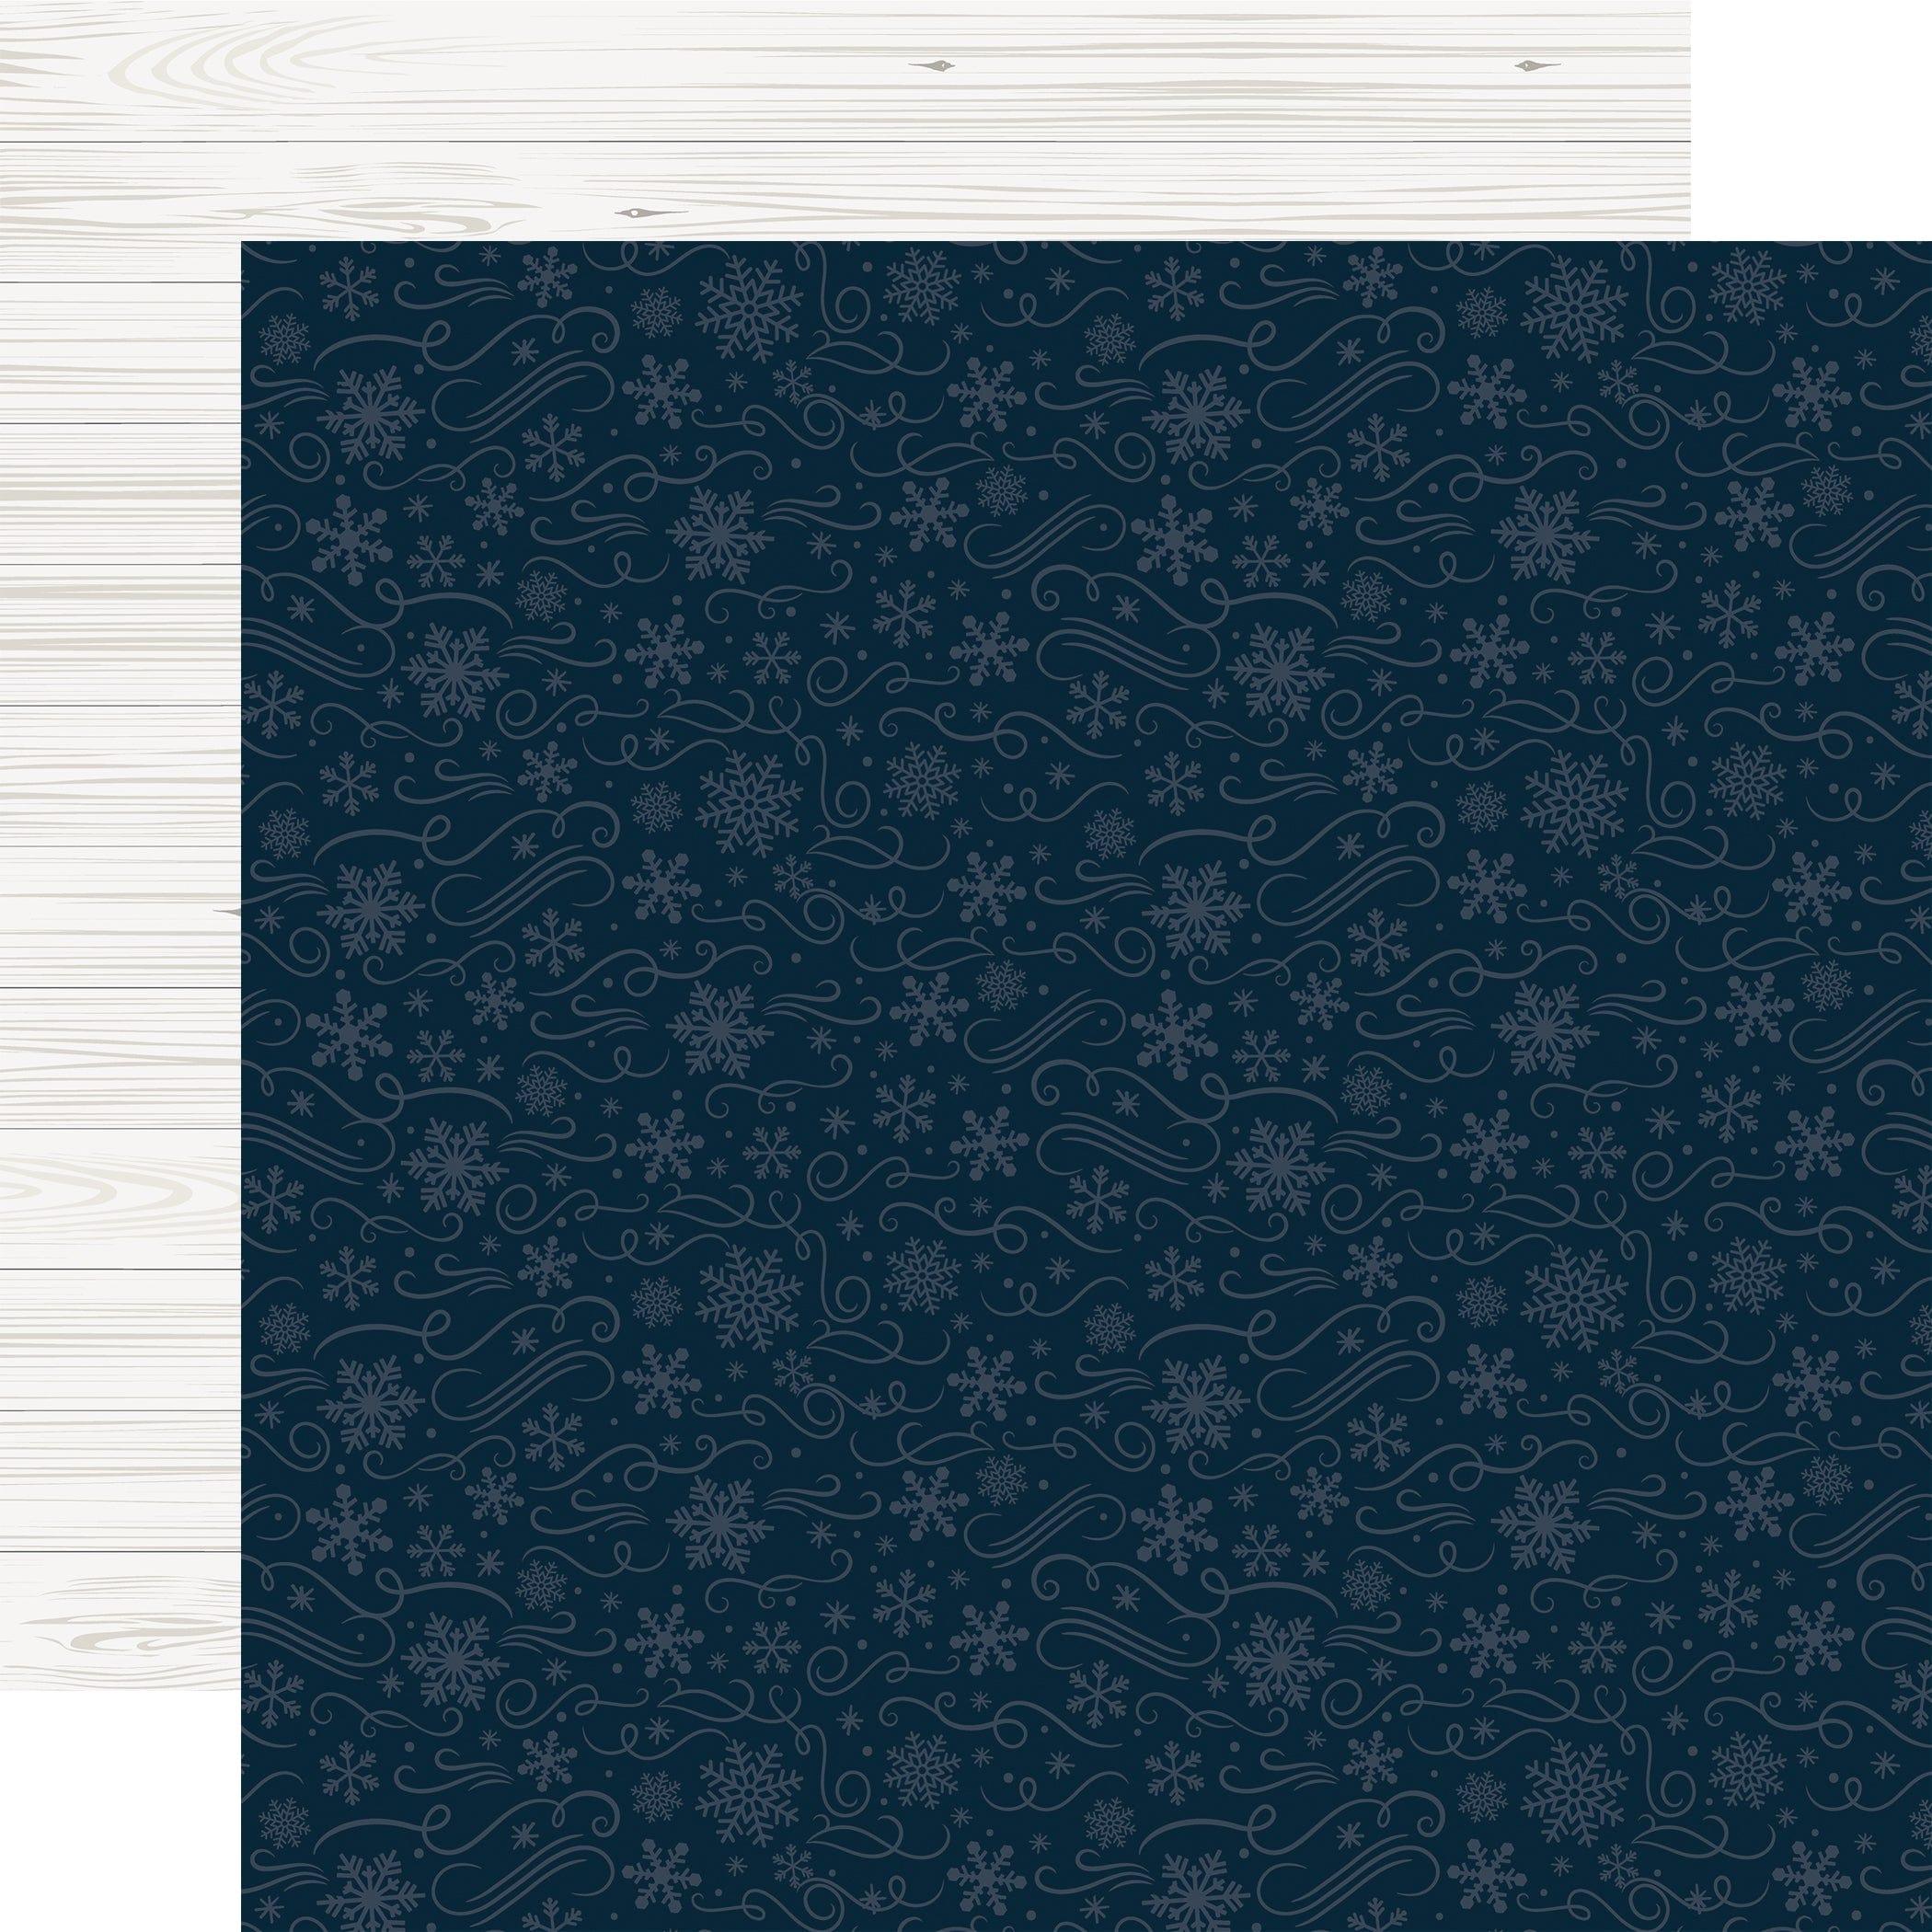 Winter Collection 3 x 4 Journaling Cards 12 x 12 Double-Sided Scrapbook  Paper by Echo Park Paper